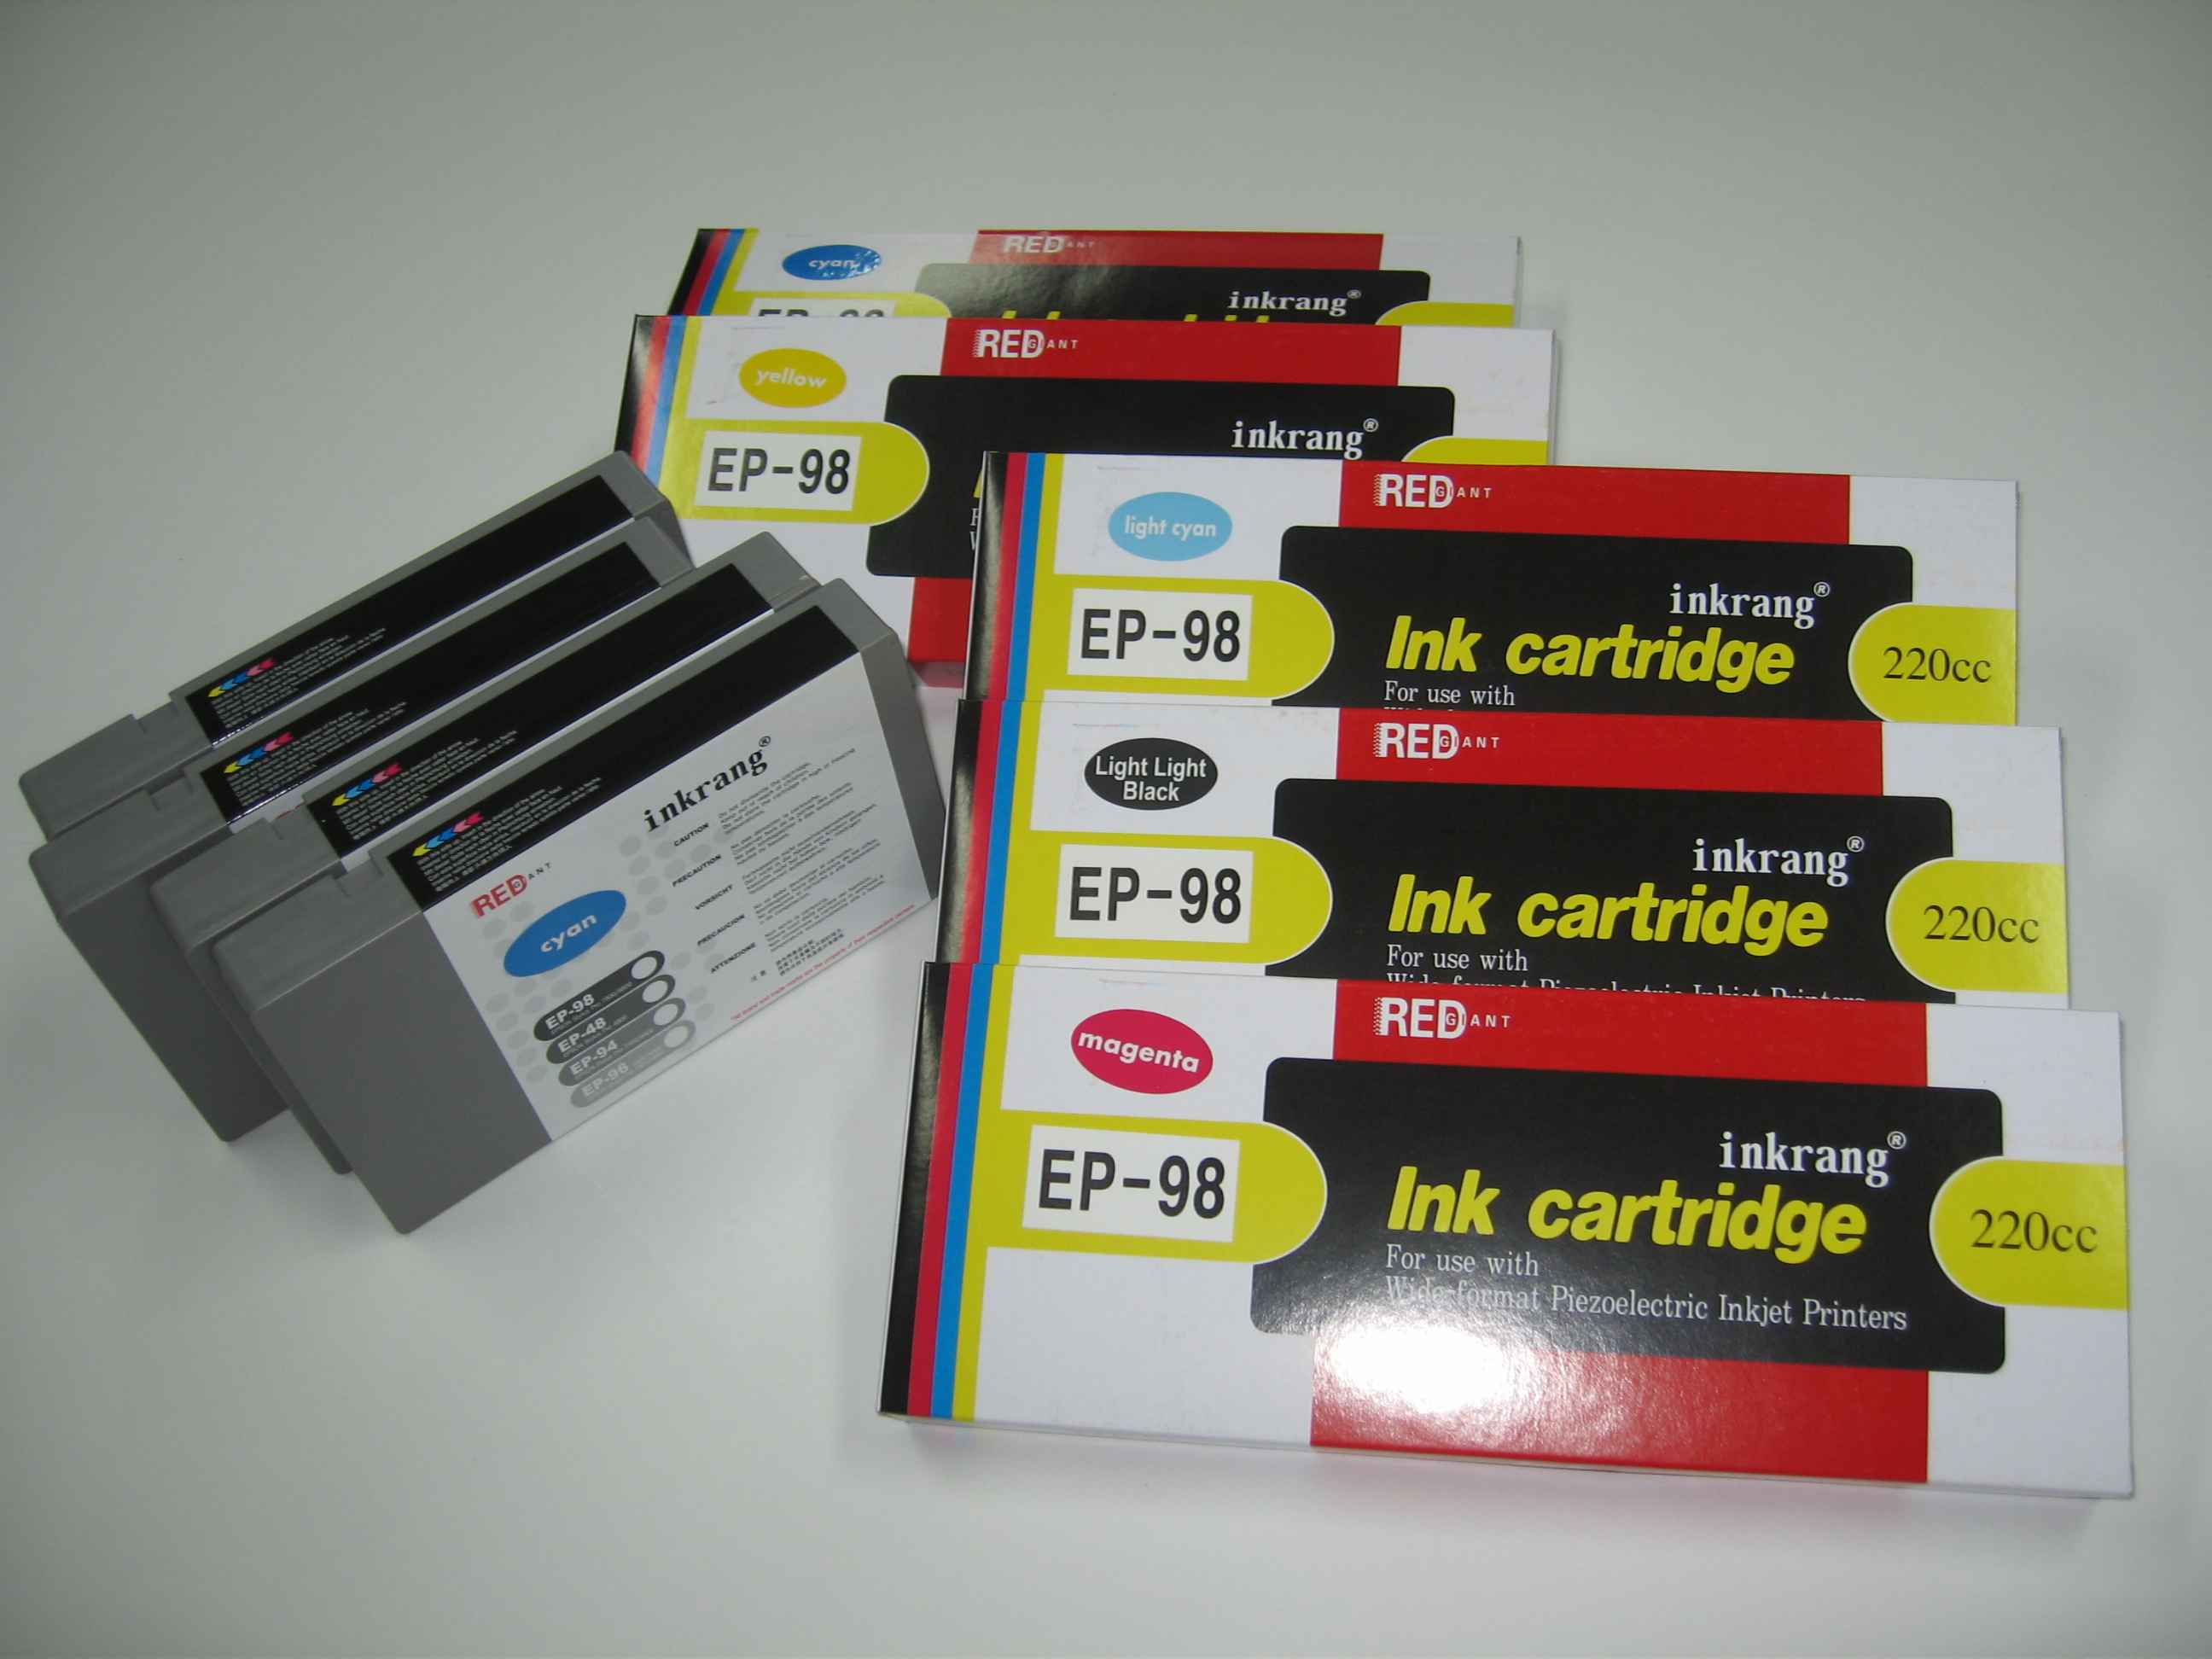 Epson Ultrachrome K3 Ink and Cartridge for Epson 7800/9800, 4800, 7400/9400 printers  Made in Korea